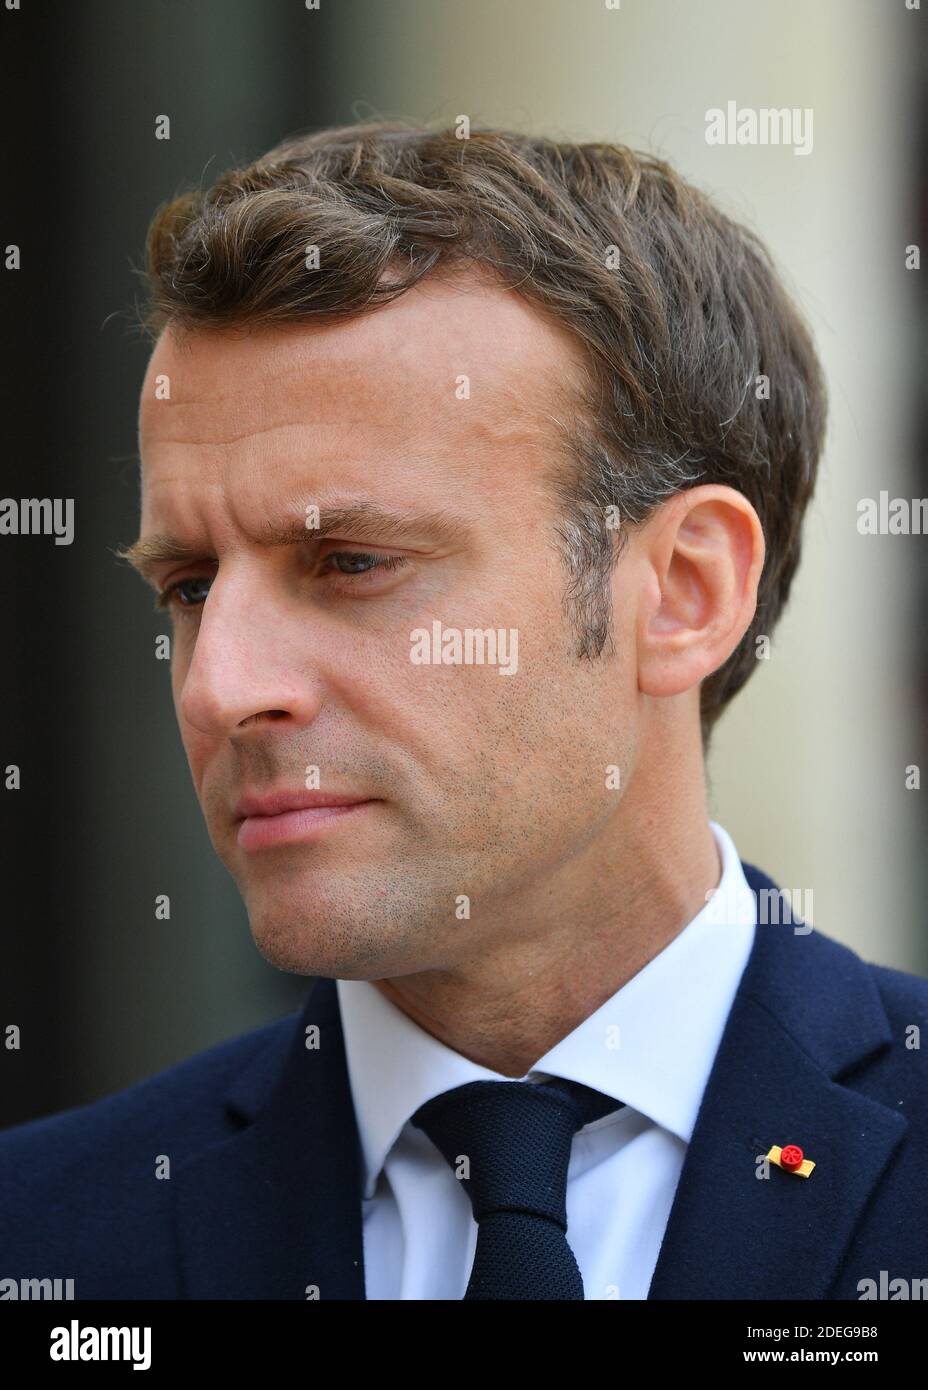 French President Emmanuel Macron welcomes the Secretary General of the Council of Europe Thorbjorn Jagland at the Elysee Palace in Paris, France on May 6, 2019. Photo by Christian Liewig/ABACAPRESS.COM Stock Photo